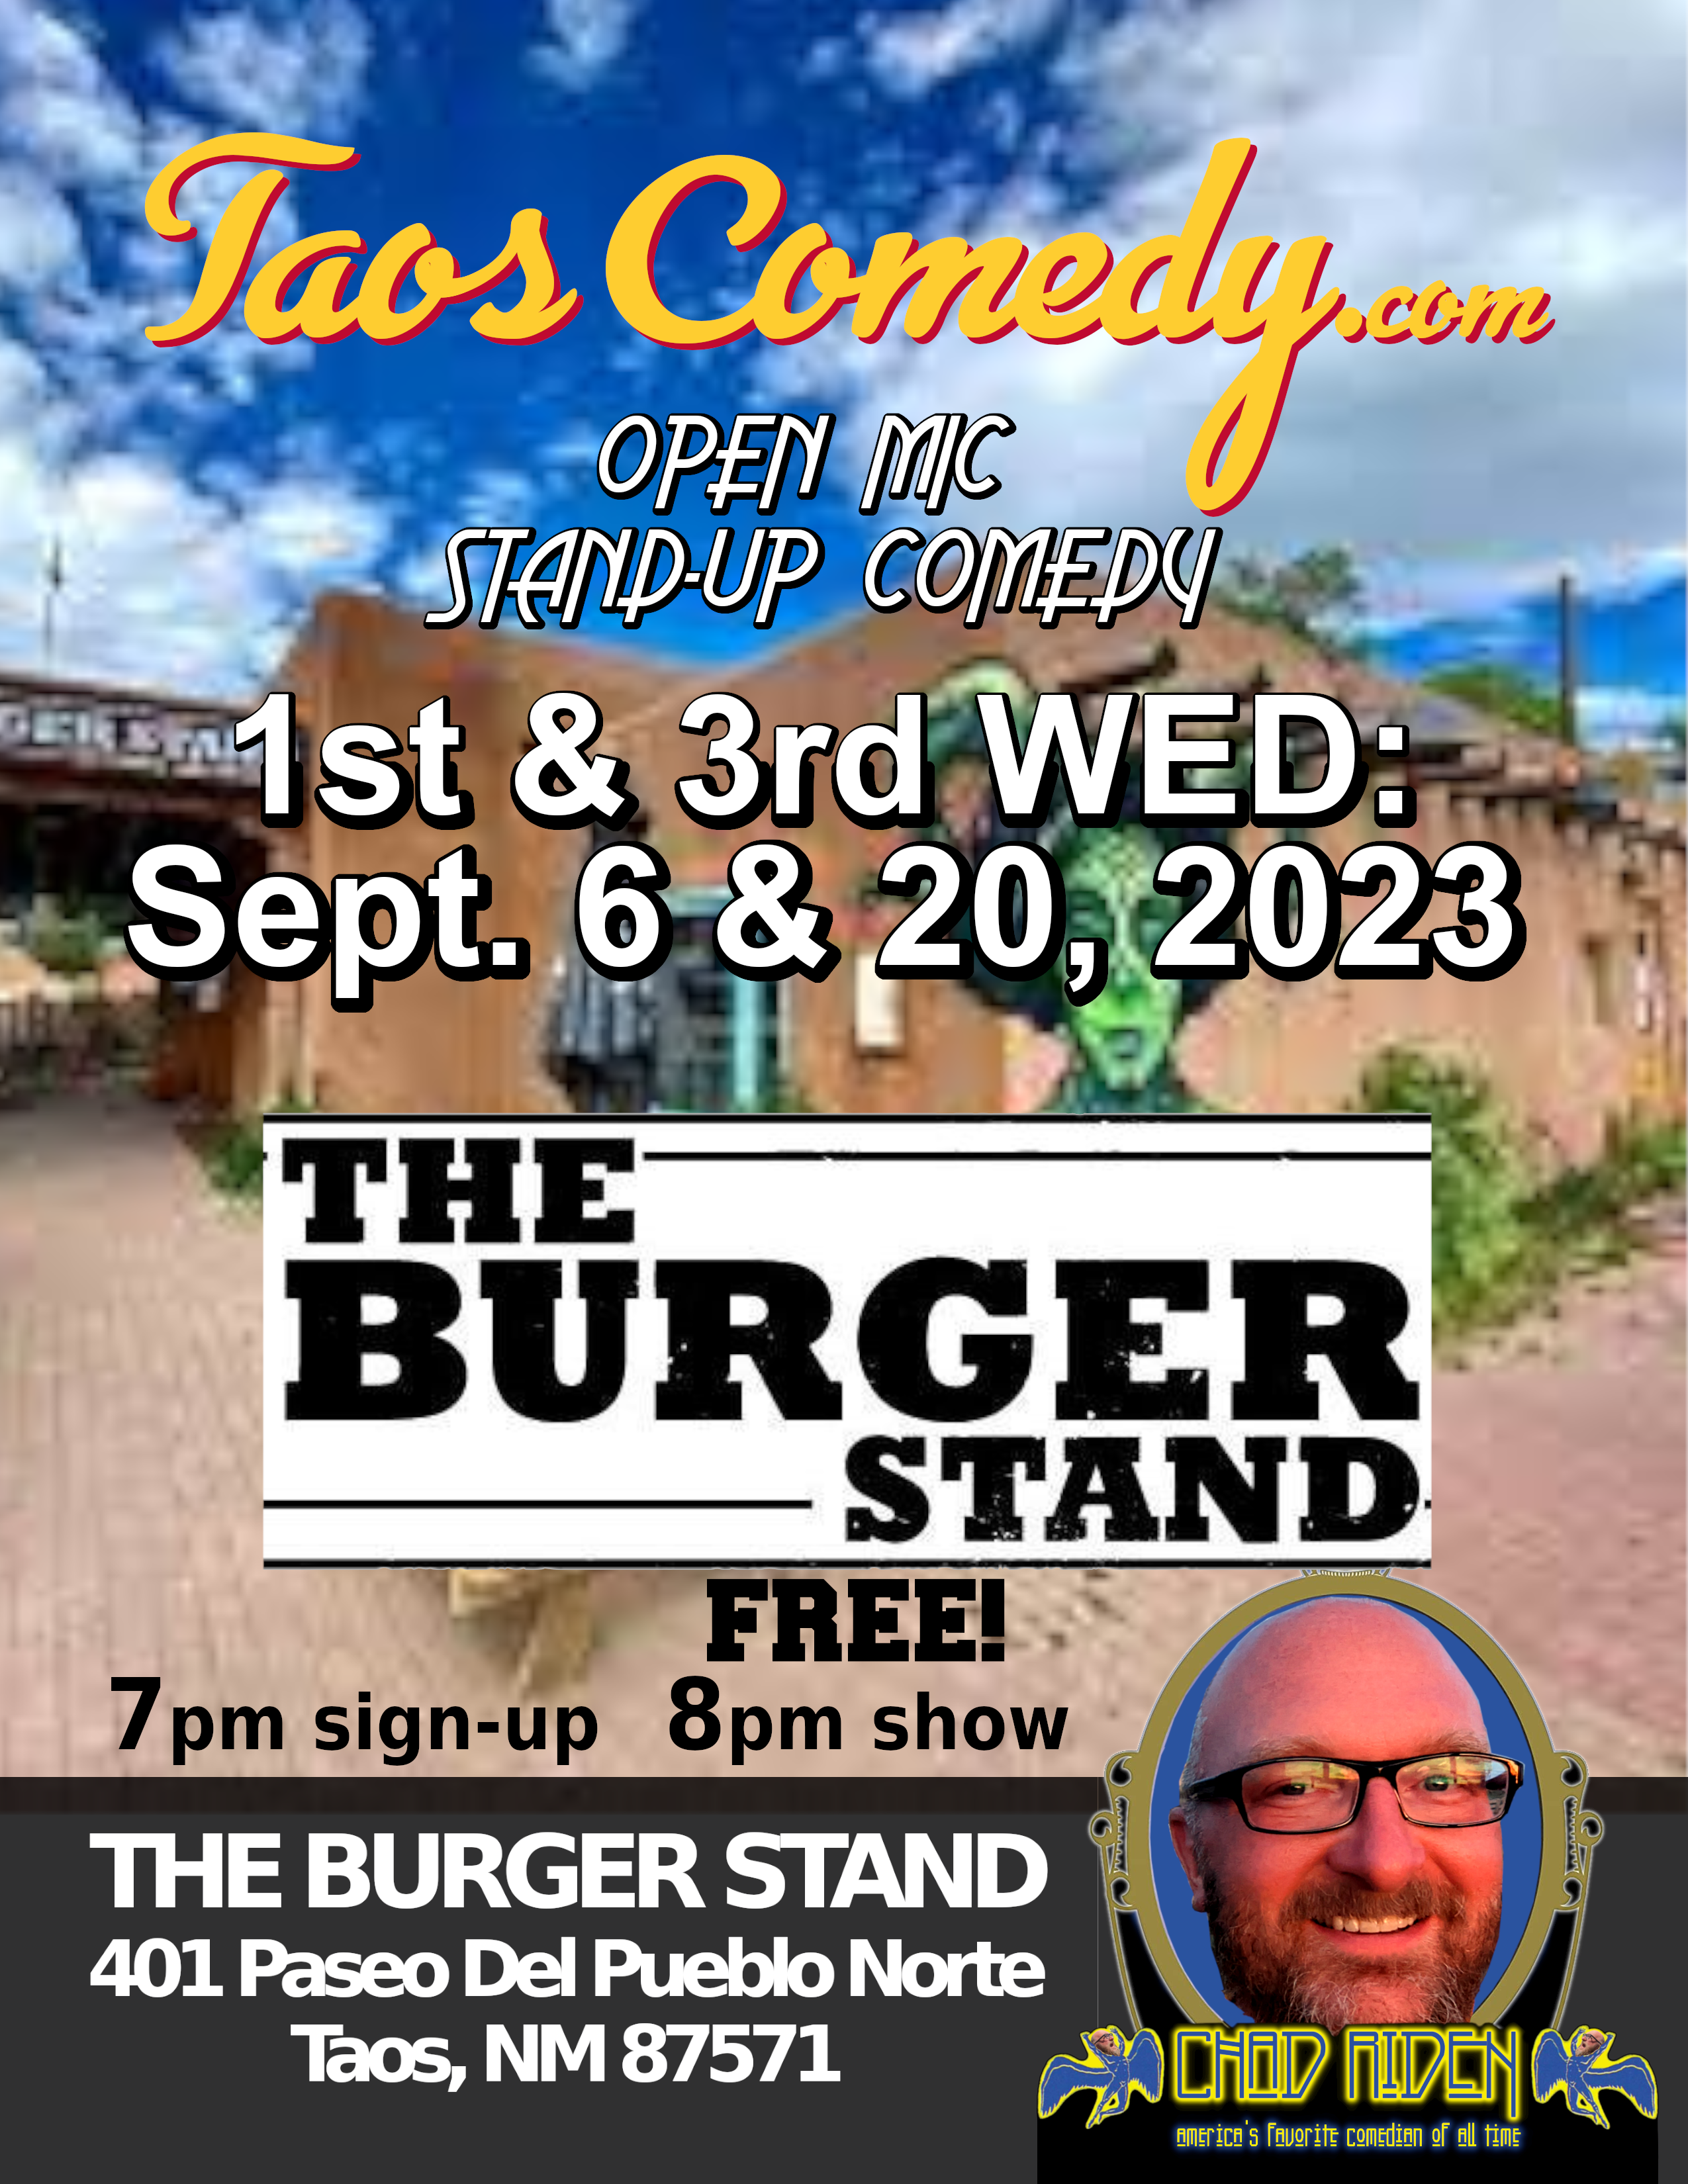 stand-up comedy open mic at The Burger Stand the 1st and 3rd Wednesdays of every month. Show up and go up. each comic gets 5 minutes. Booked professional headliner to follow open mic. Sign up at 7pm Show at 8pm FREE! Produced and hosted by Chad Riden. The Burger Stand has amazing burgers and 22 beers on tap. The Burger Stand 401 Paseo Del Pueblo Norte, Taos, NM 87571 575-758-5522